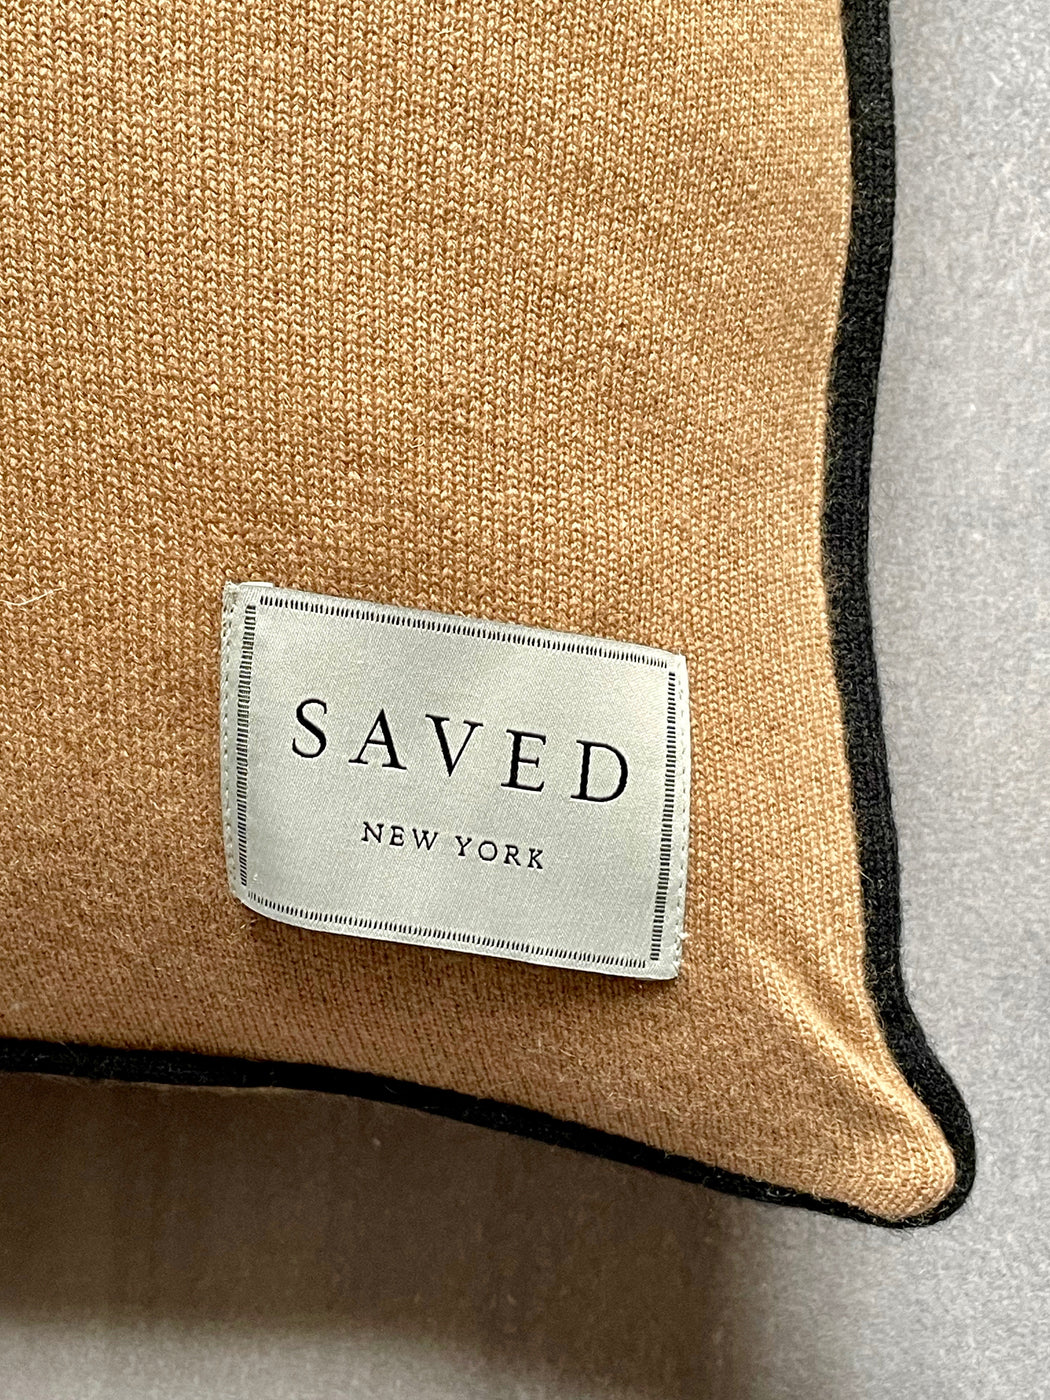 Saved NY "Calabria" Mongolian Cashmere Pillow - Mustard